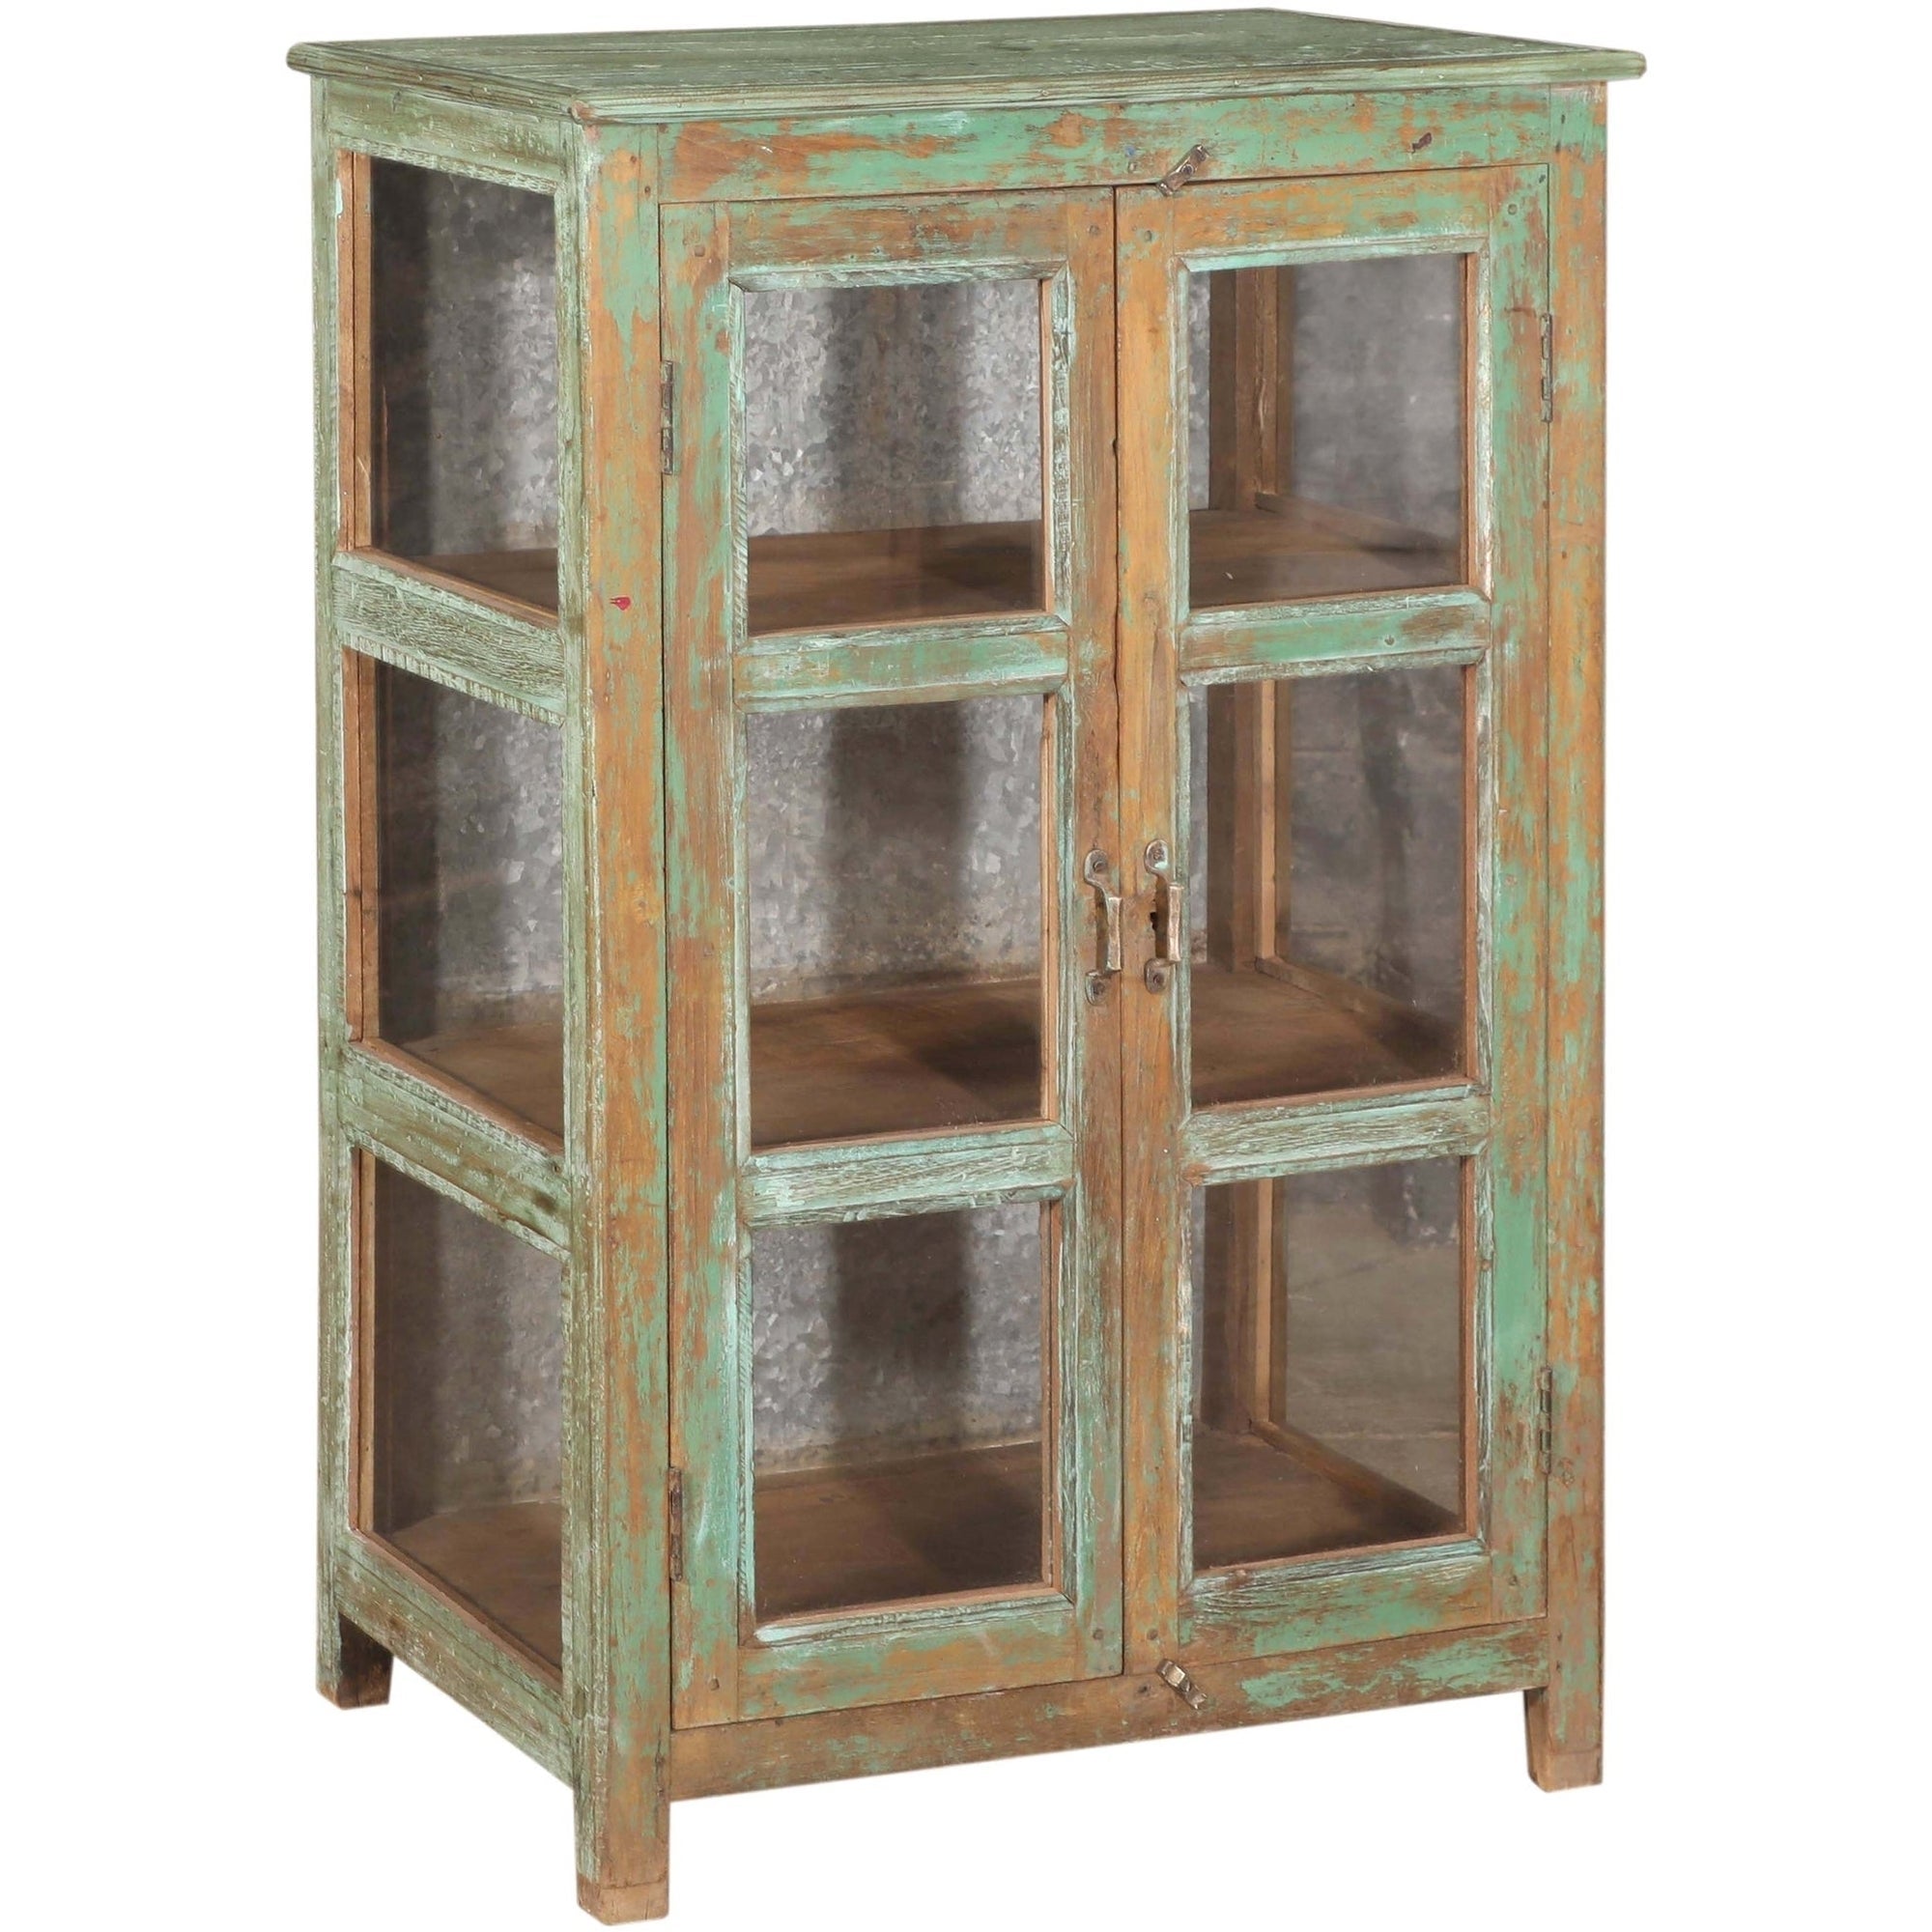 RM-059261, Wooden Cabinet With Glass, Teak, 50+Yrs Old - iDekor8